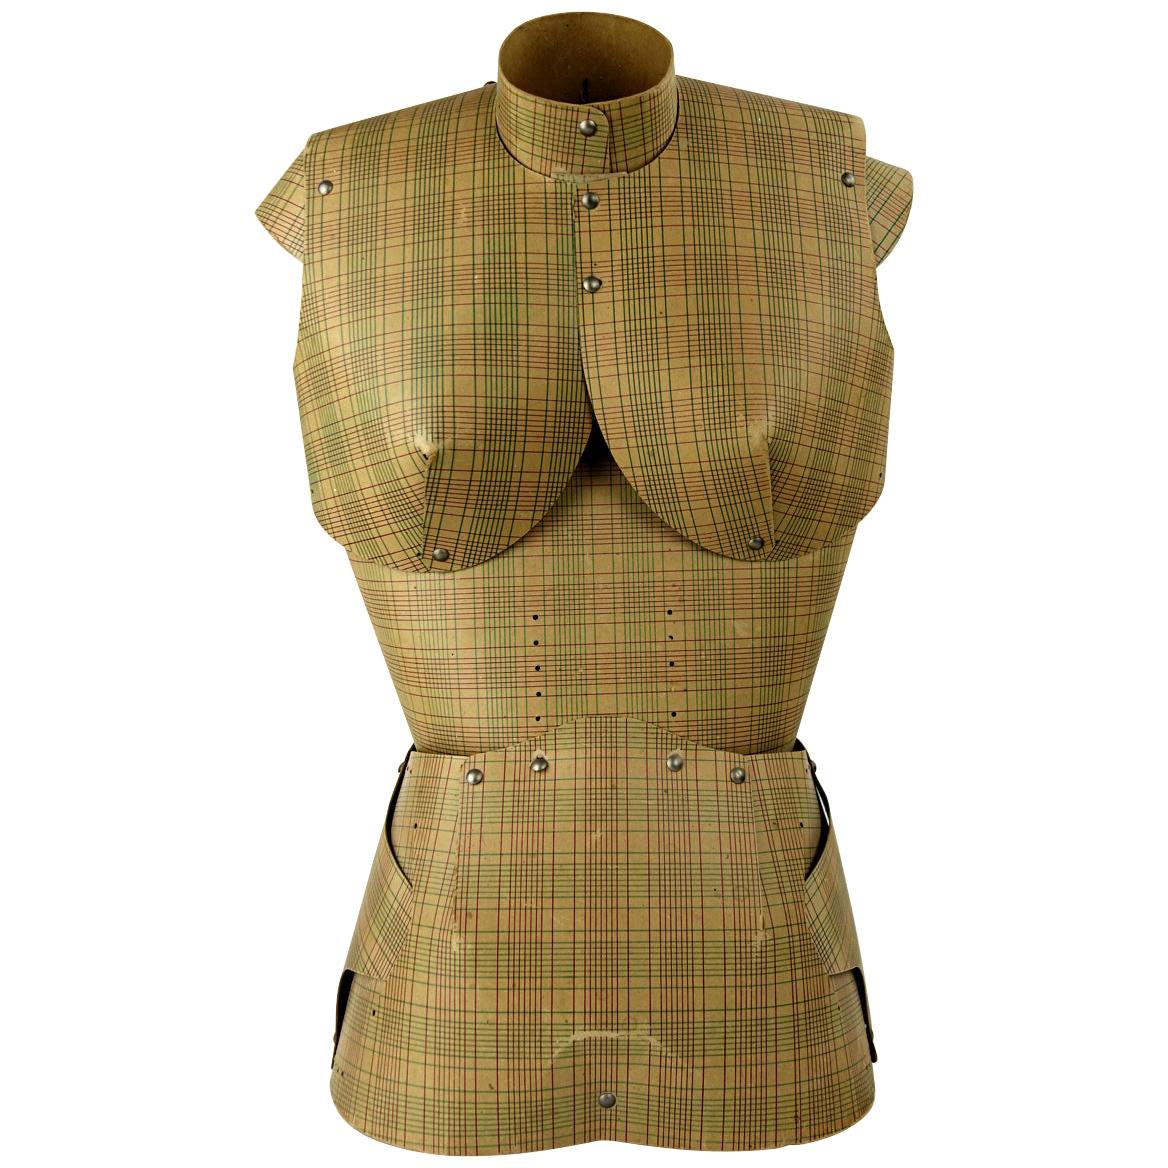 Very Decorative Mannequin or Tailor's Dummy Made of Checkered Thick Cardboard